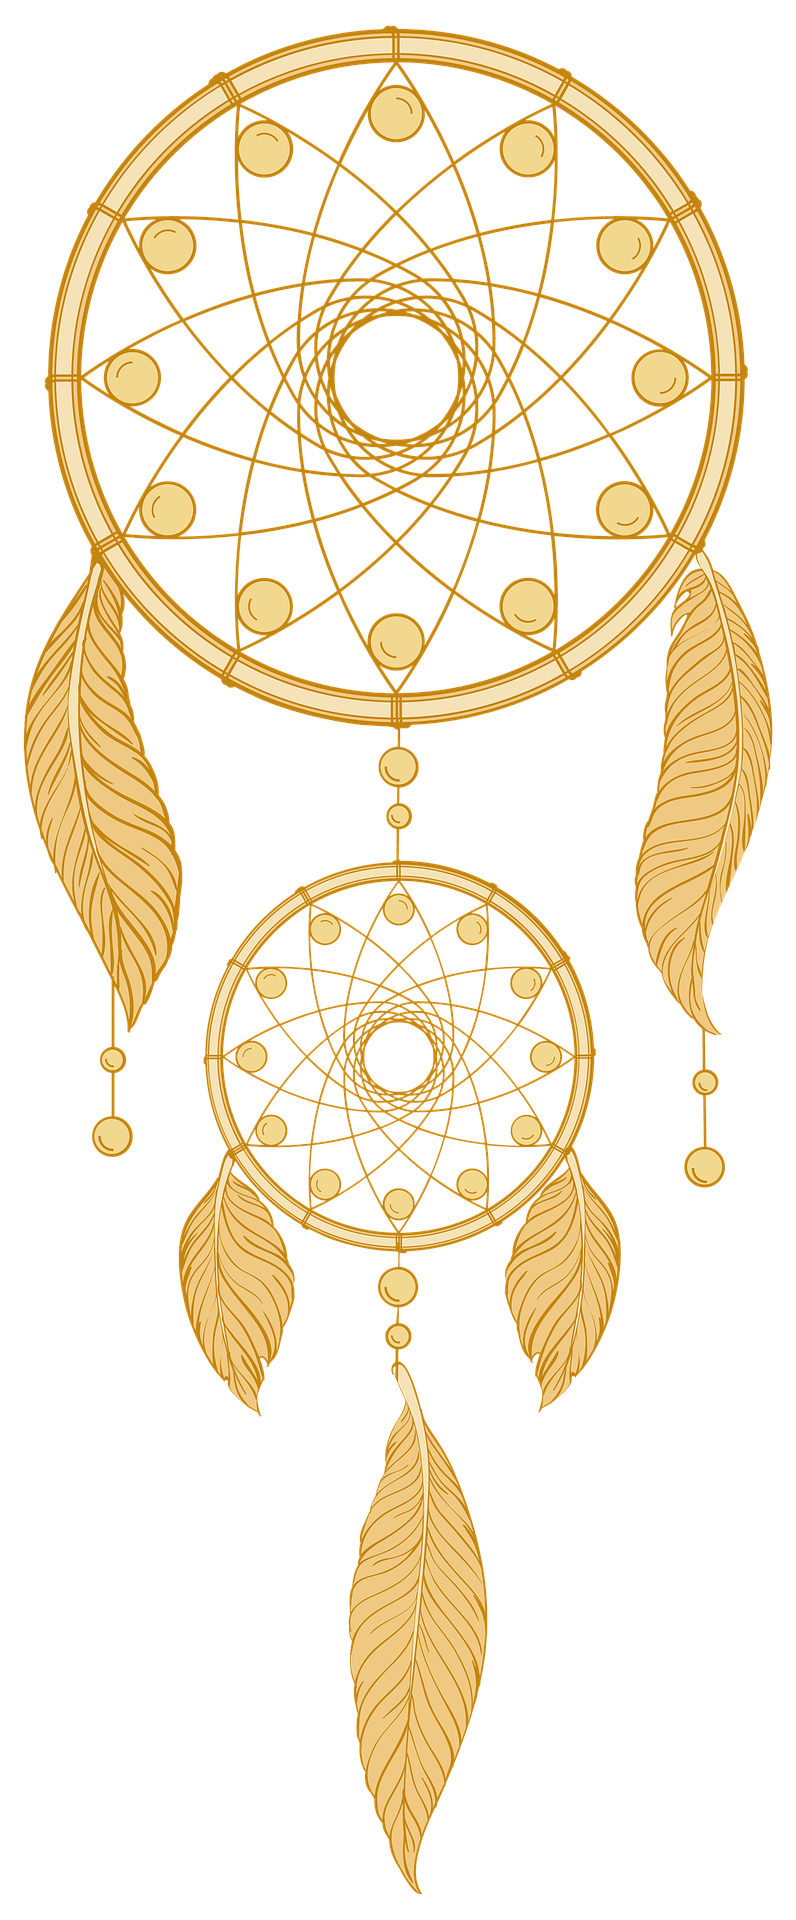 Wheel United Dreamcatcher States Americans In Medicine PNG Image